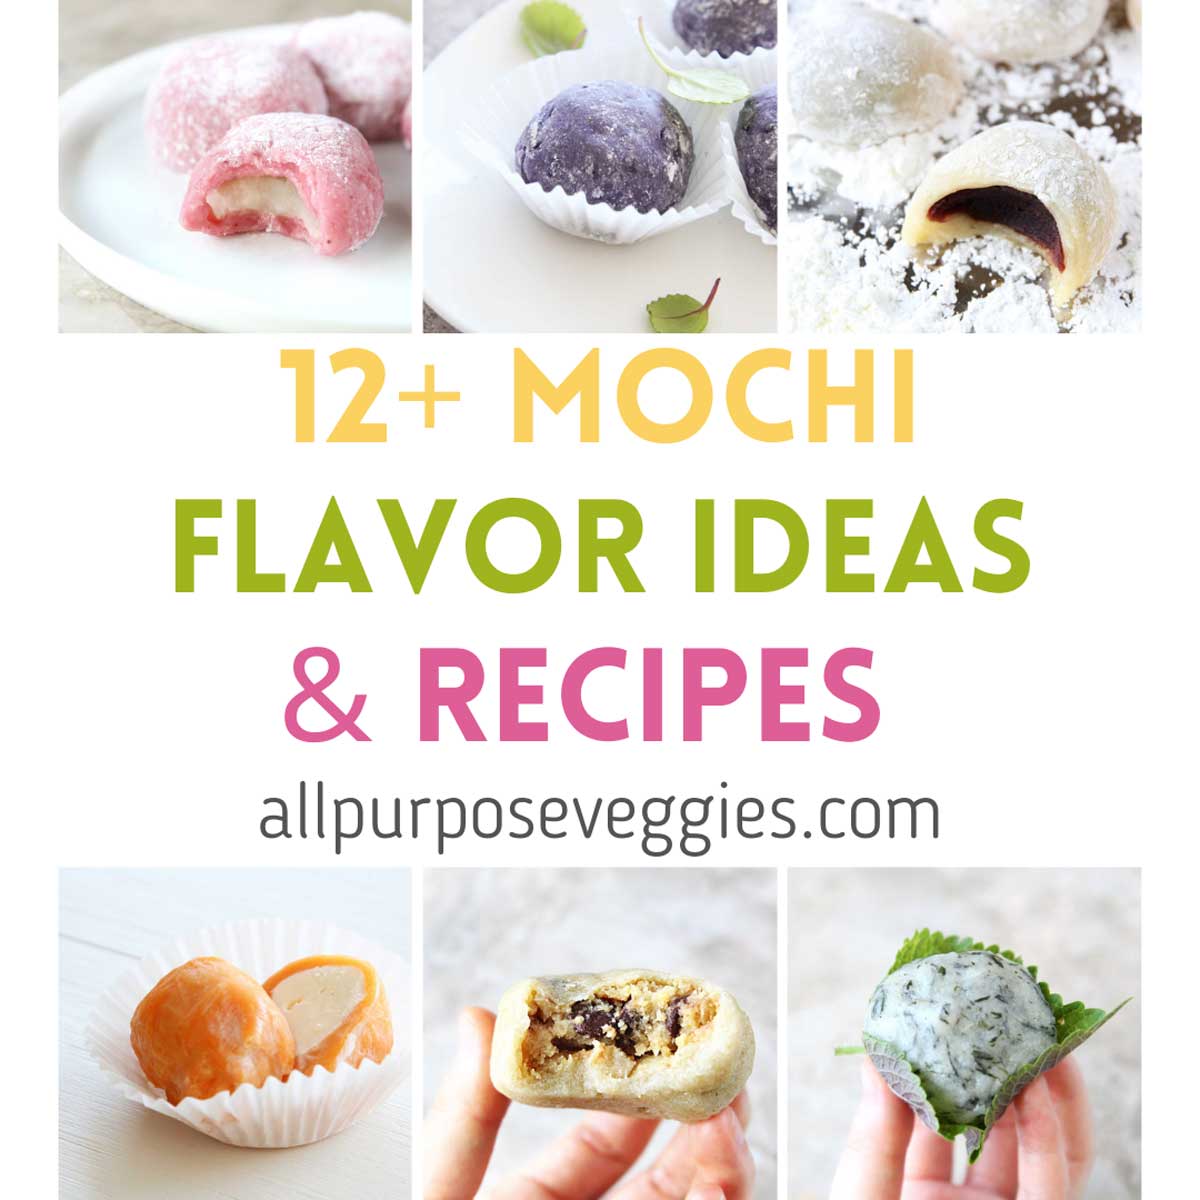 The Ultimate List of Mochi Flavors & Ideas (with 20 Easy Recipes) - Tang Yuan Fillings